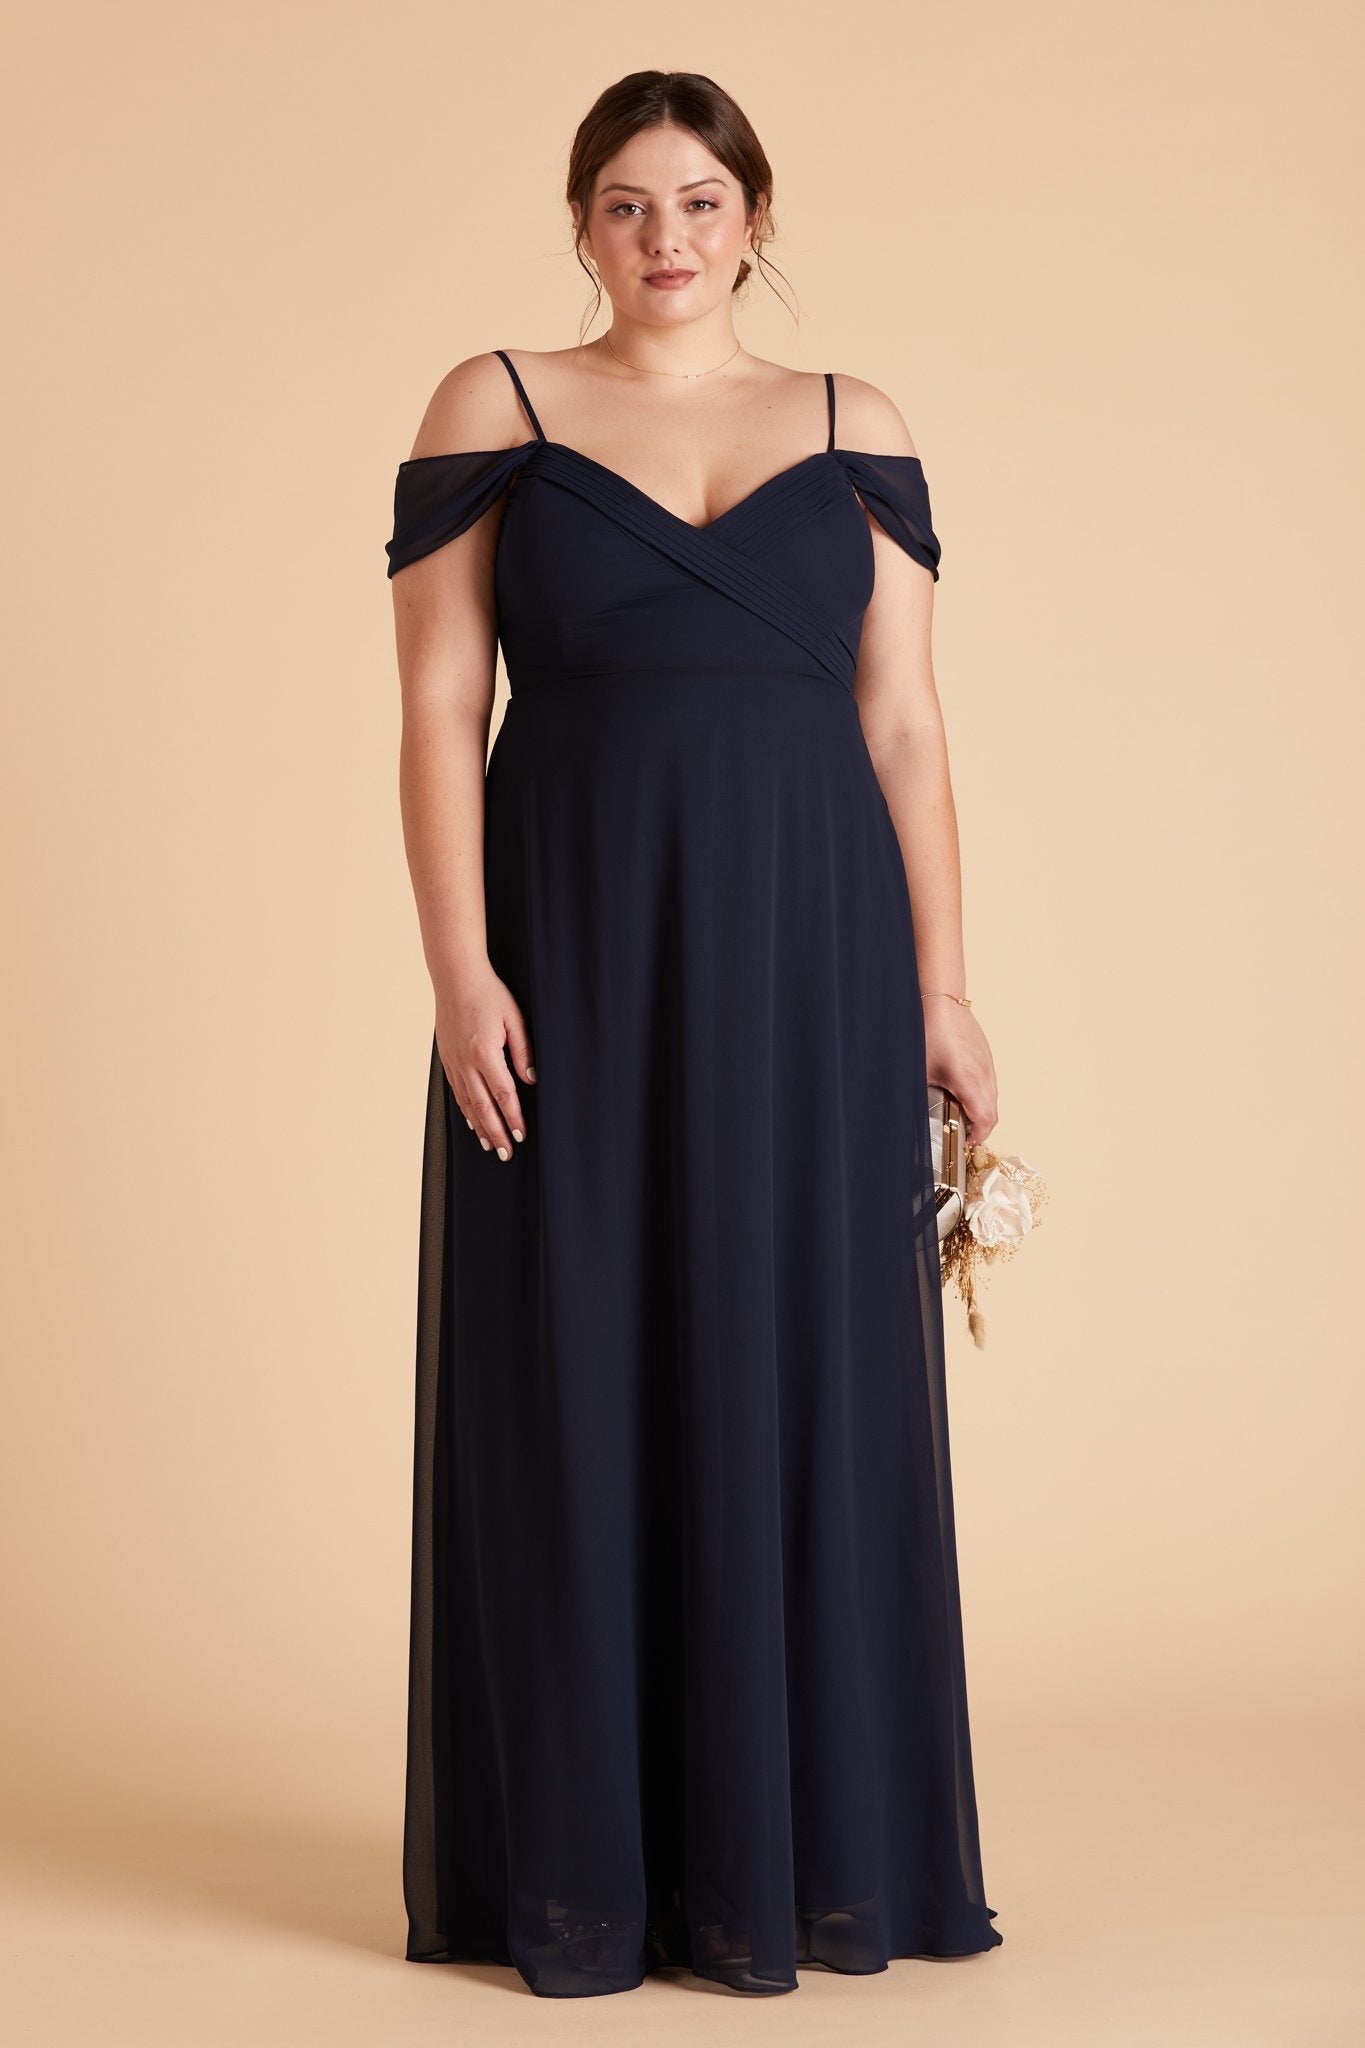 Spence convertible plus size bridesmaid dress in navy blue chiffon by Birdy Grey, front view